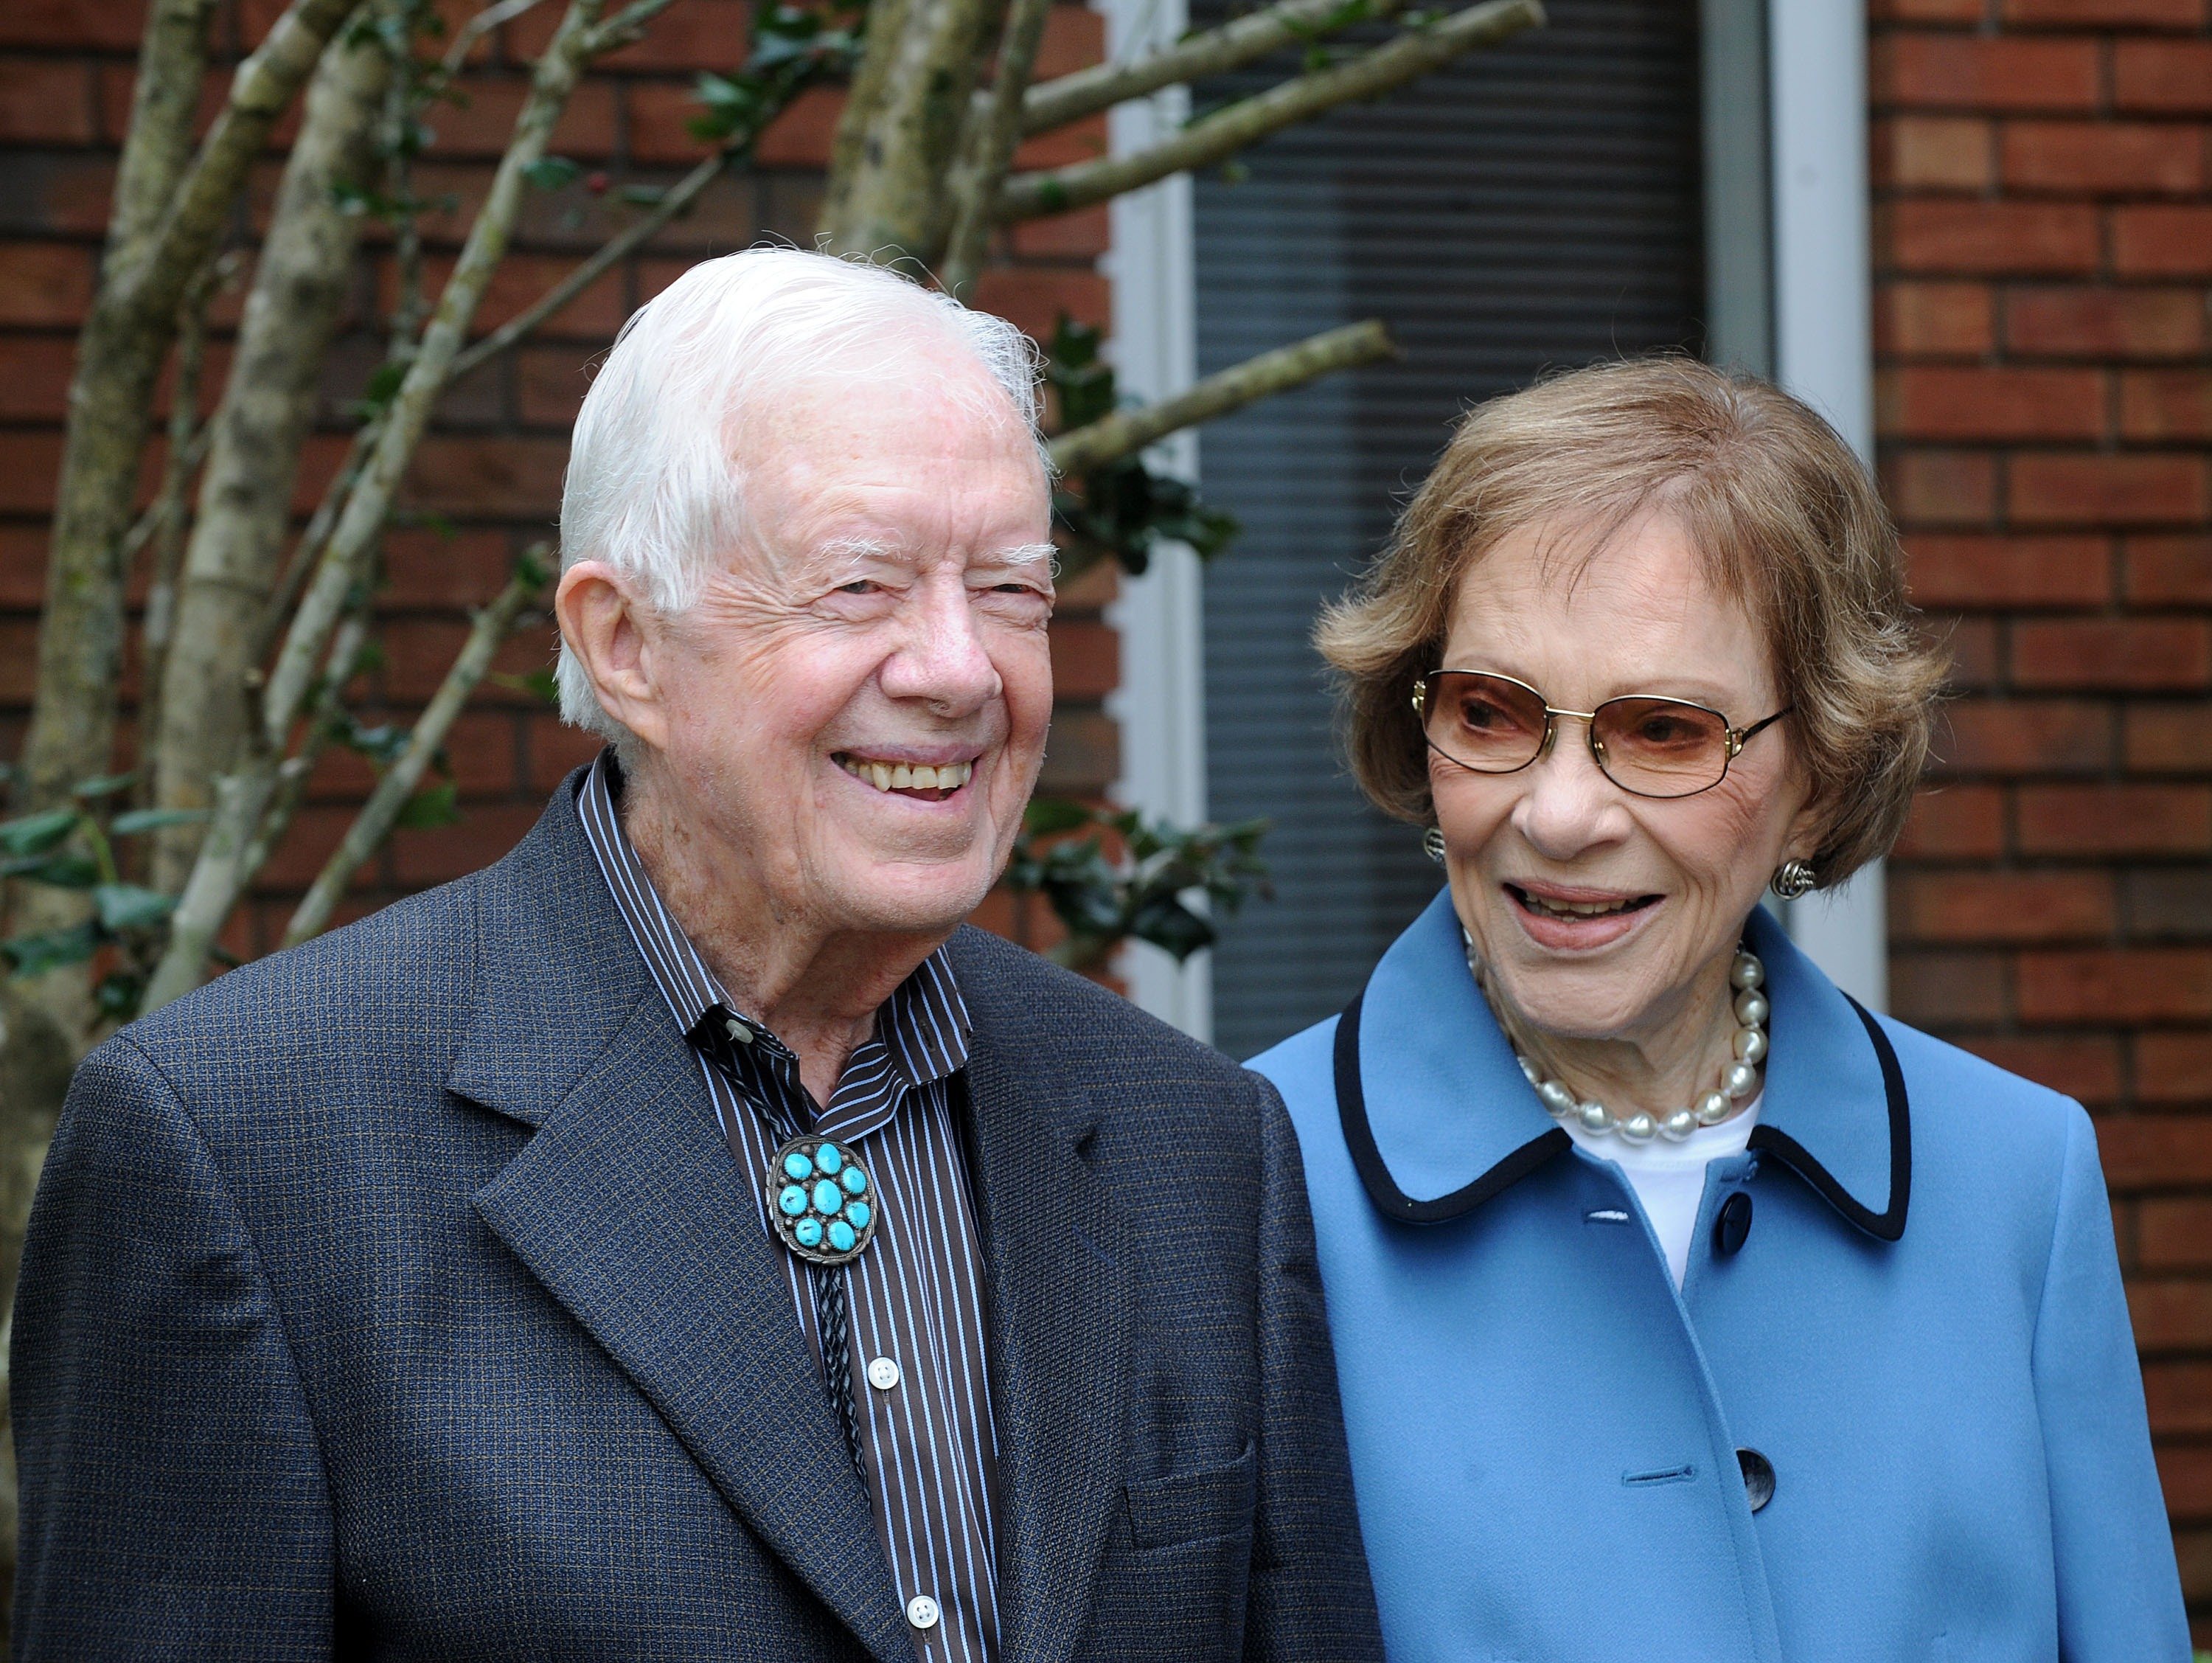 Former President Jimmy Carter and Rosalynn Carter on April 20, 2014 in Plains, Georgia. | Source: Getty Images